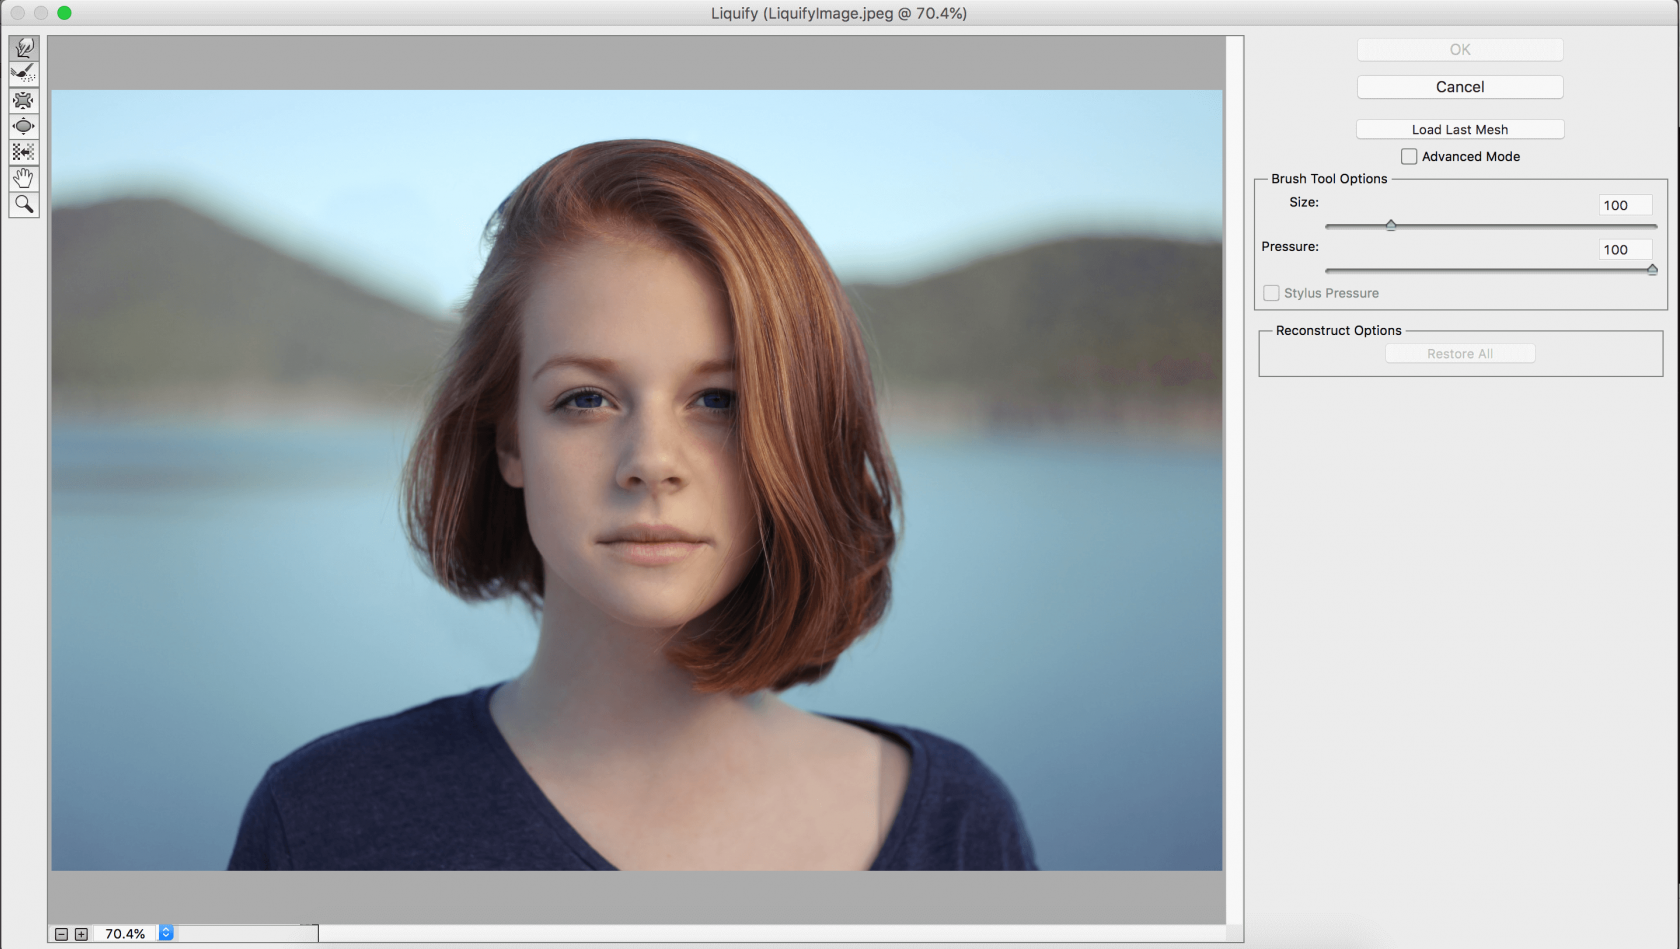 How to Use the Liquify Tool in Photoshop: Mastering the Basics Image3